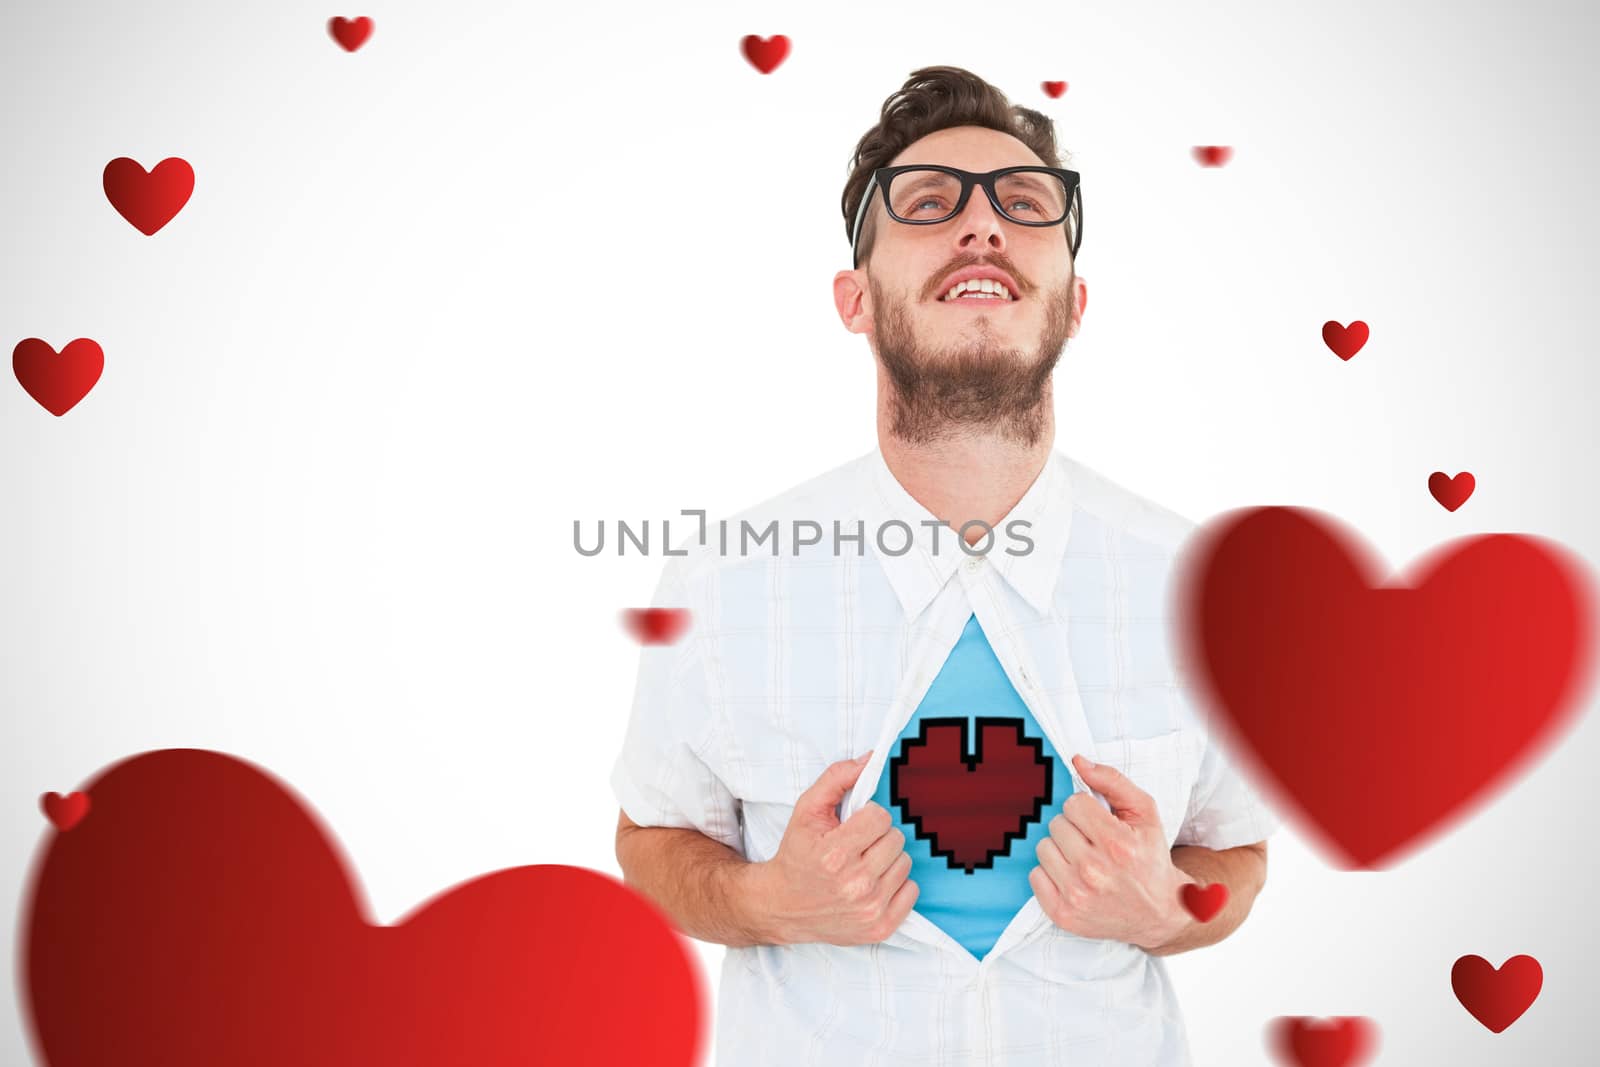 Composite image of heart by Wavebreakmedia